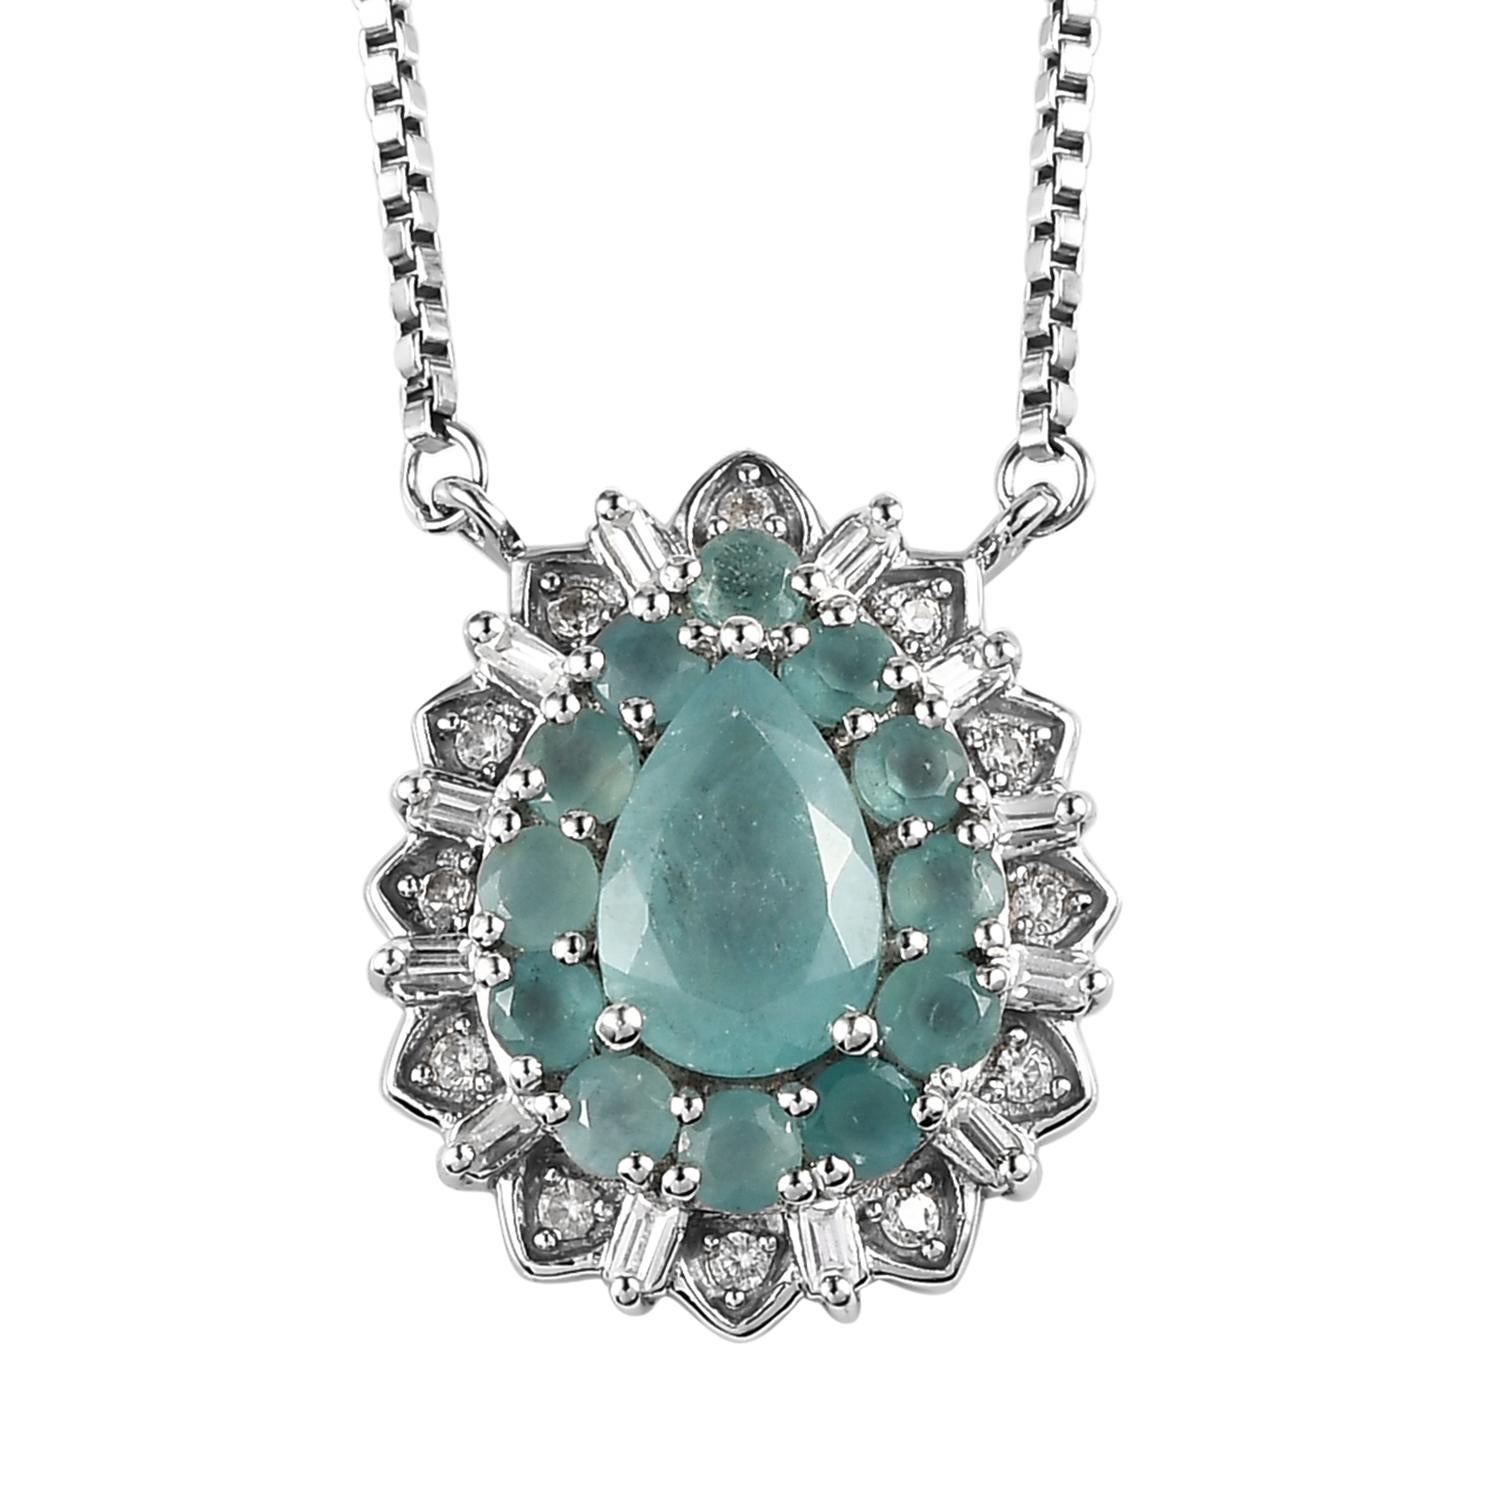 Worthy of being treasured like royal jewelry, this grandidierite and diamond pendant necklace has a unique luster. The bluish-green tone of grandidierite and the colorless sparkle of diamond compliments each other like no other. Smooth-cut